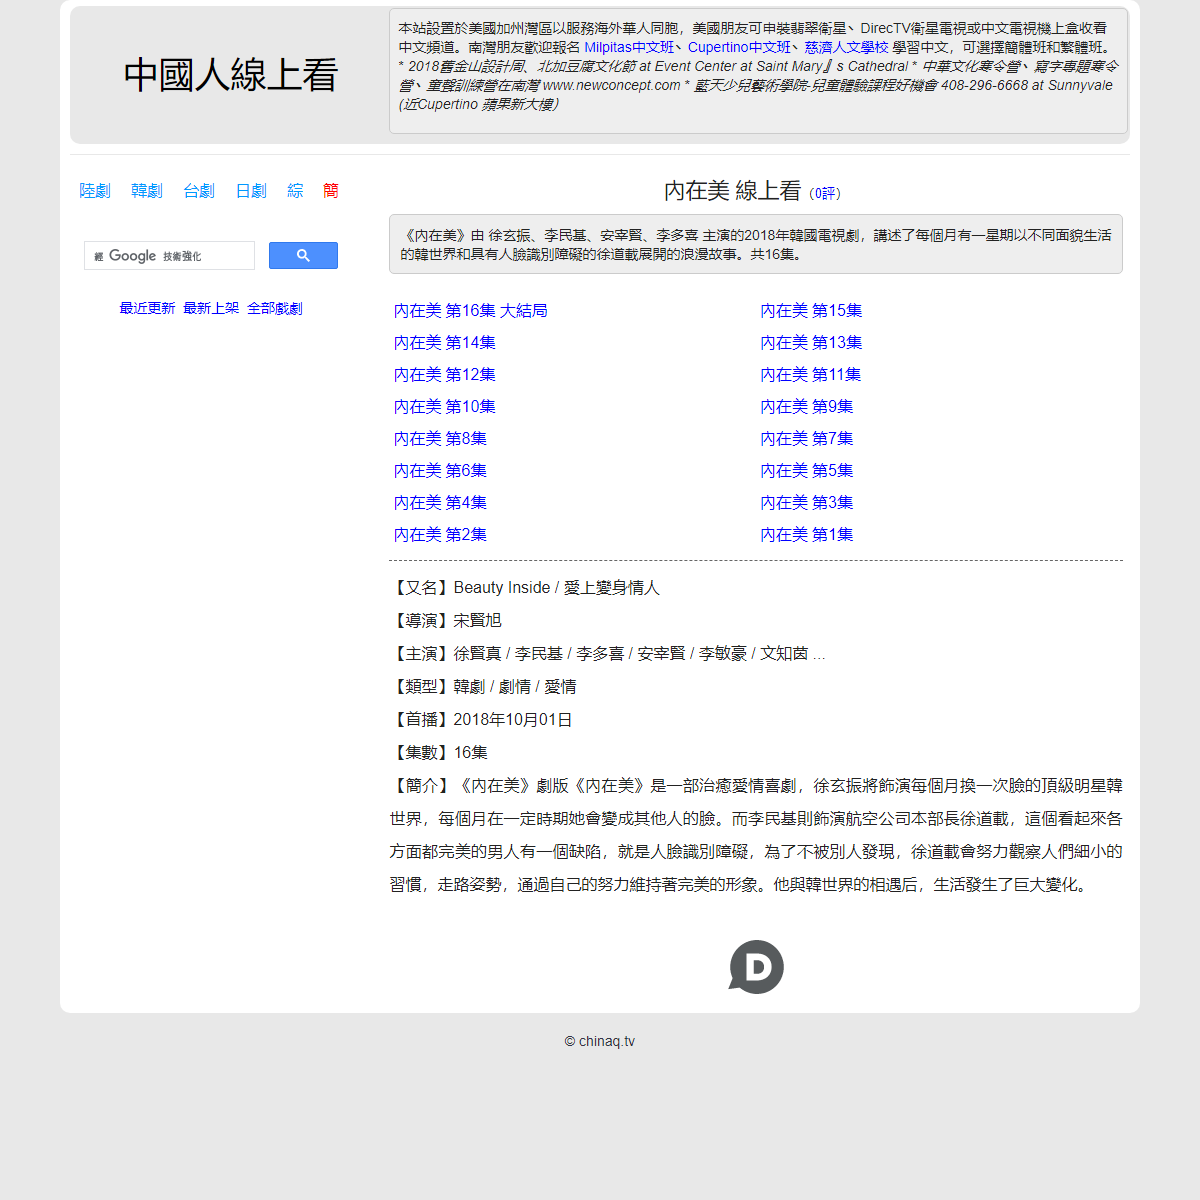 A complete backup of https://chinaq.tv/kr181001c/